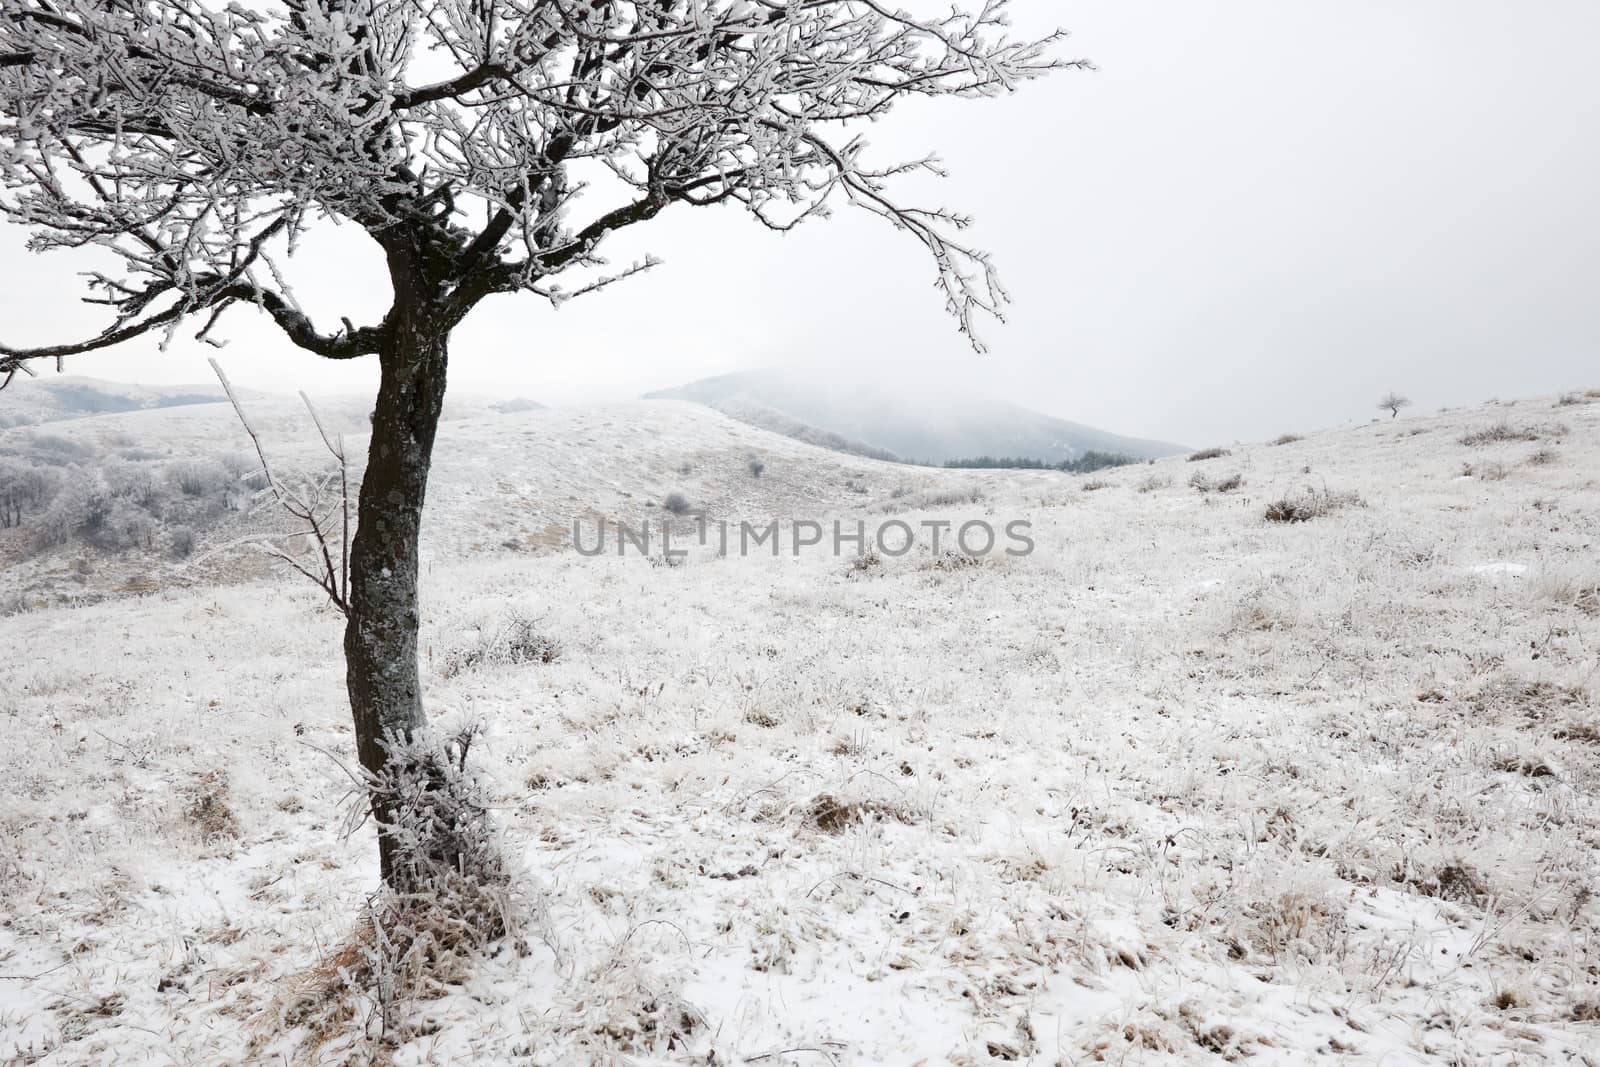 Winter mountain scenery with part of lonely tree